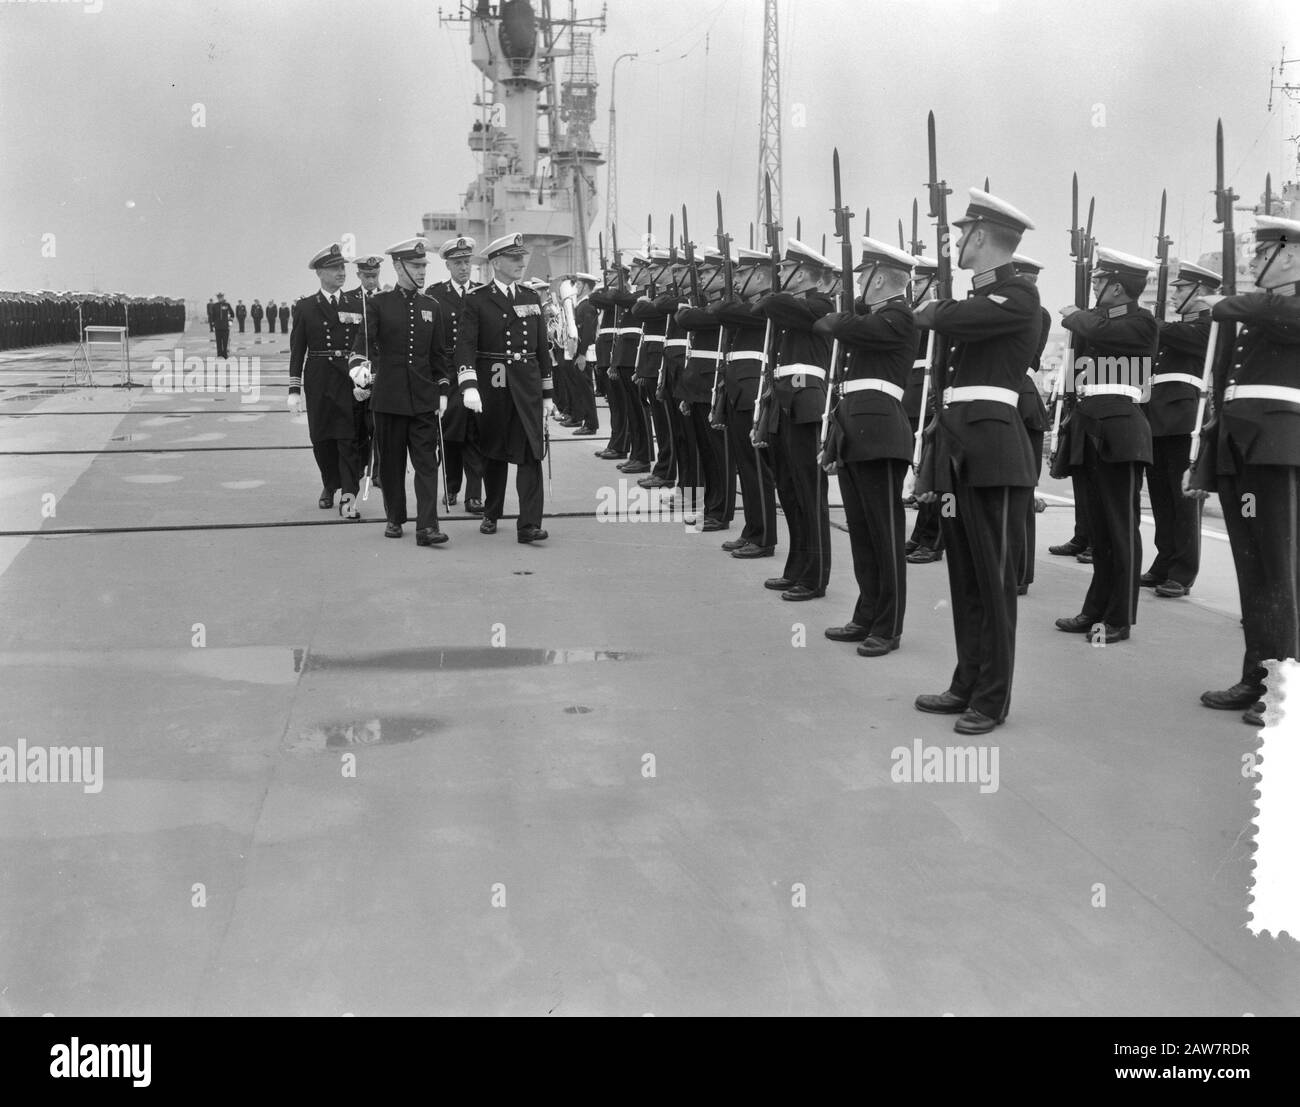 Transfer of command of Squadron V by Rear-Admiral L.E.H. Rees Coming commander JRH. W.C.M. de Jonge van Ellemeet (deputy. Chief Naval Staff) aboard Hr. Ms. Airbase Ship Karel Doorman Date: August 25, 1964 Location: Den Helder, Noord-Holland Keywords: navy, officers, ships Person Name: Young Ellemeet W.C.M. the, Reeser, L.E.H. Stock Photo